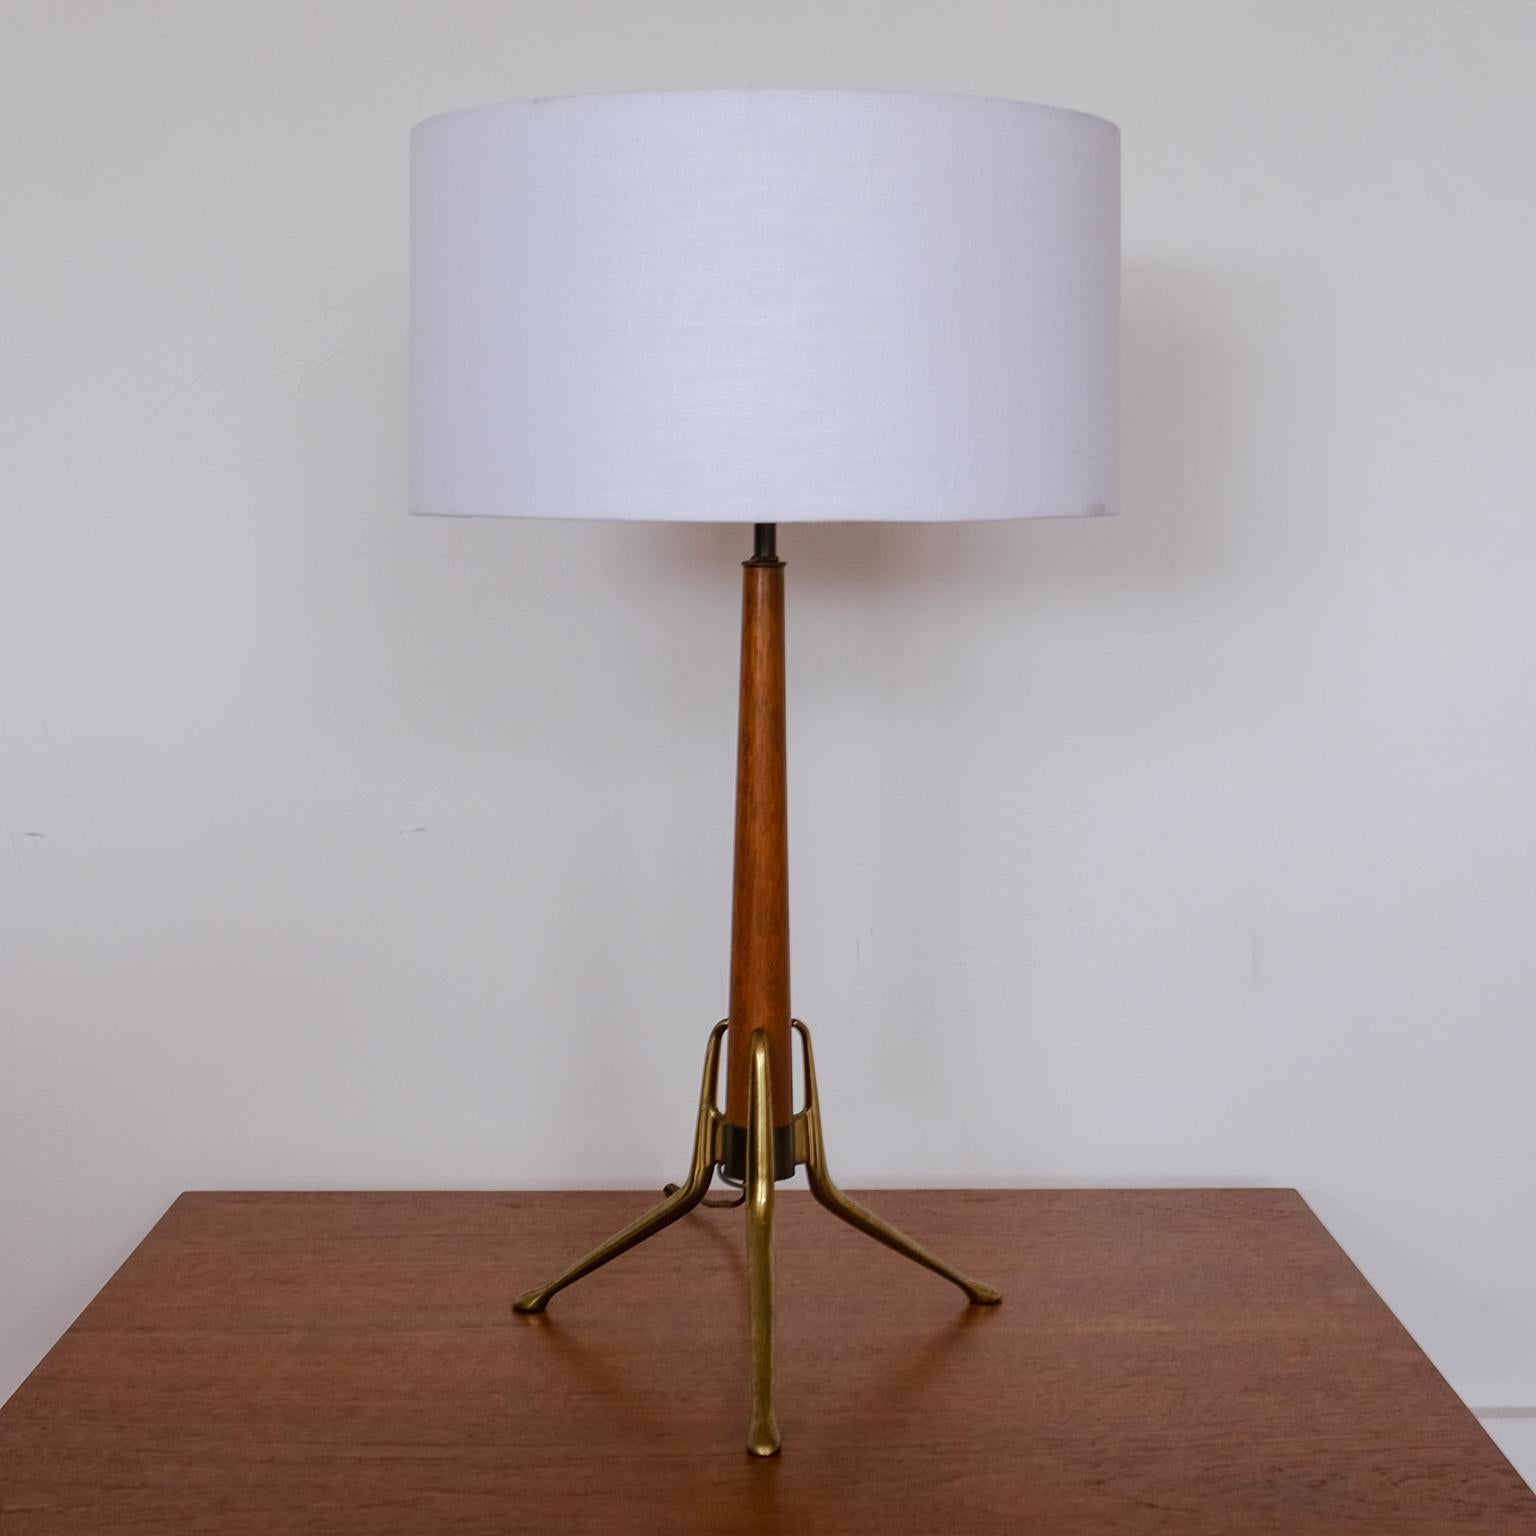 Mid-Century Modern Brass and Walnut Tripod Table Lamp by Gerald Thurston for Lightolier, 1950s For Sale